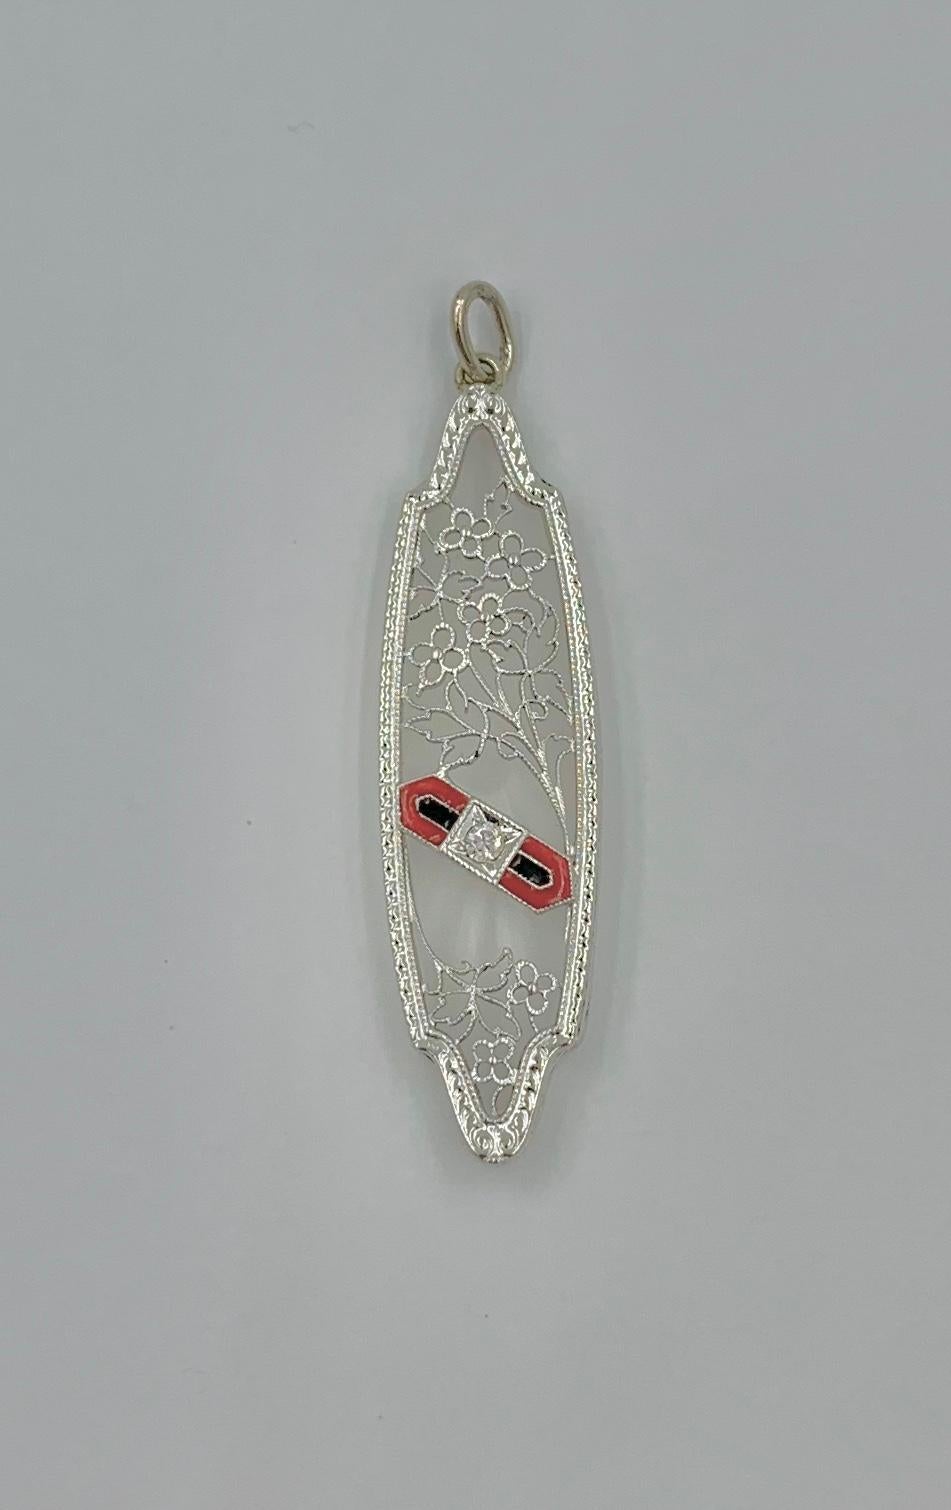 A very special antique Edwardian, Art Deco pendant with a central panel of Rock Crystal with a Diamond and Enamel center and flower and leaf filigree design in 14 Karat White Gold.  This is one of the most beautiful Art Deco Rock Crystal pendants we